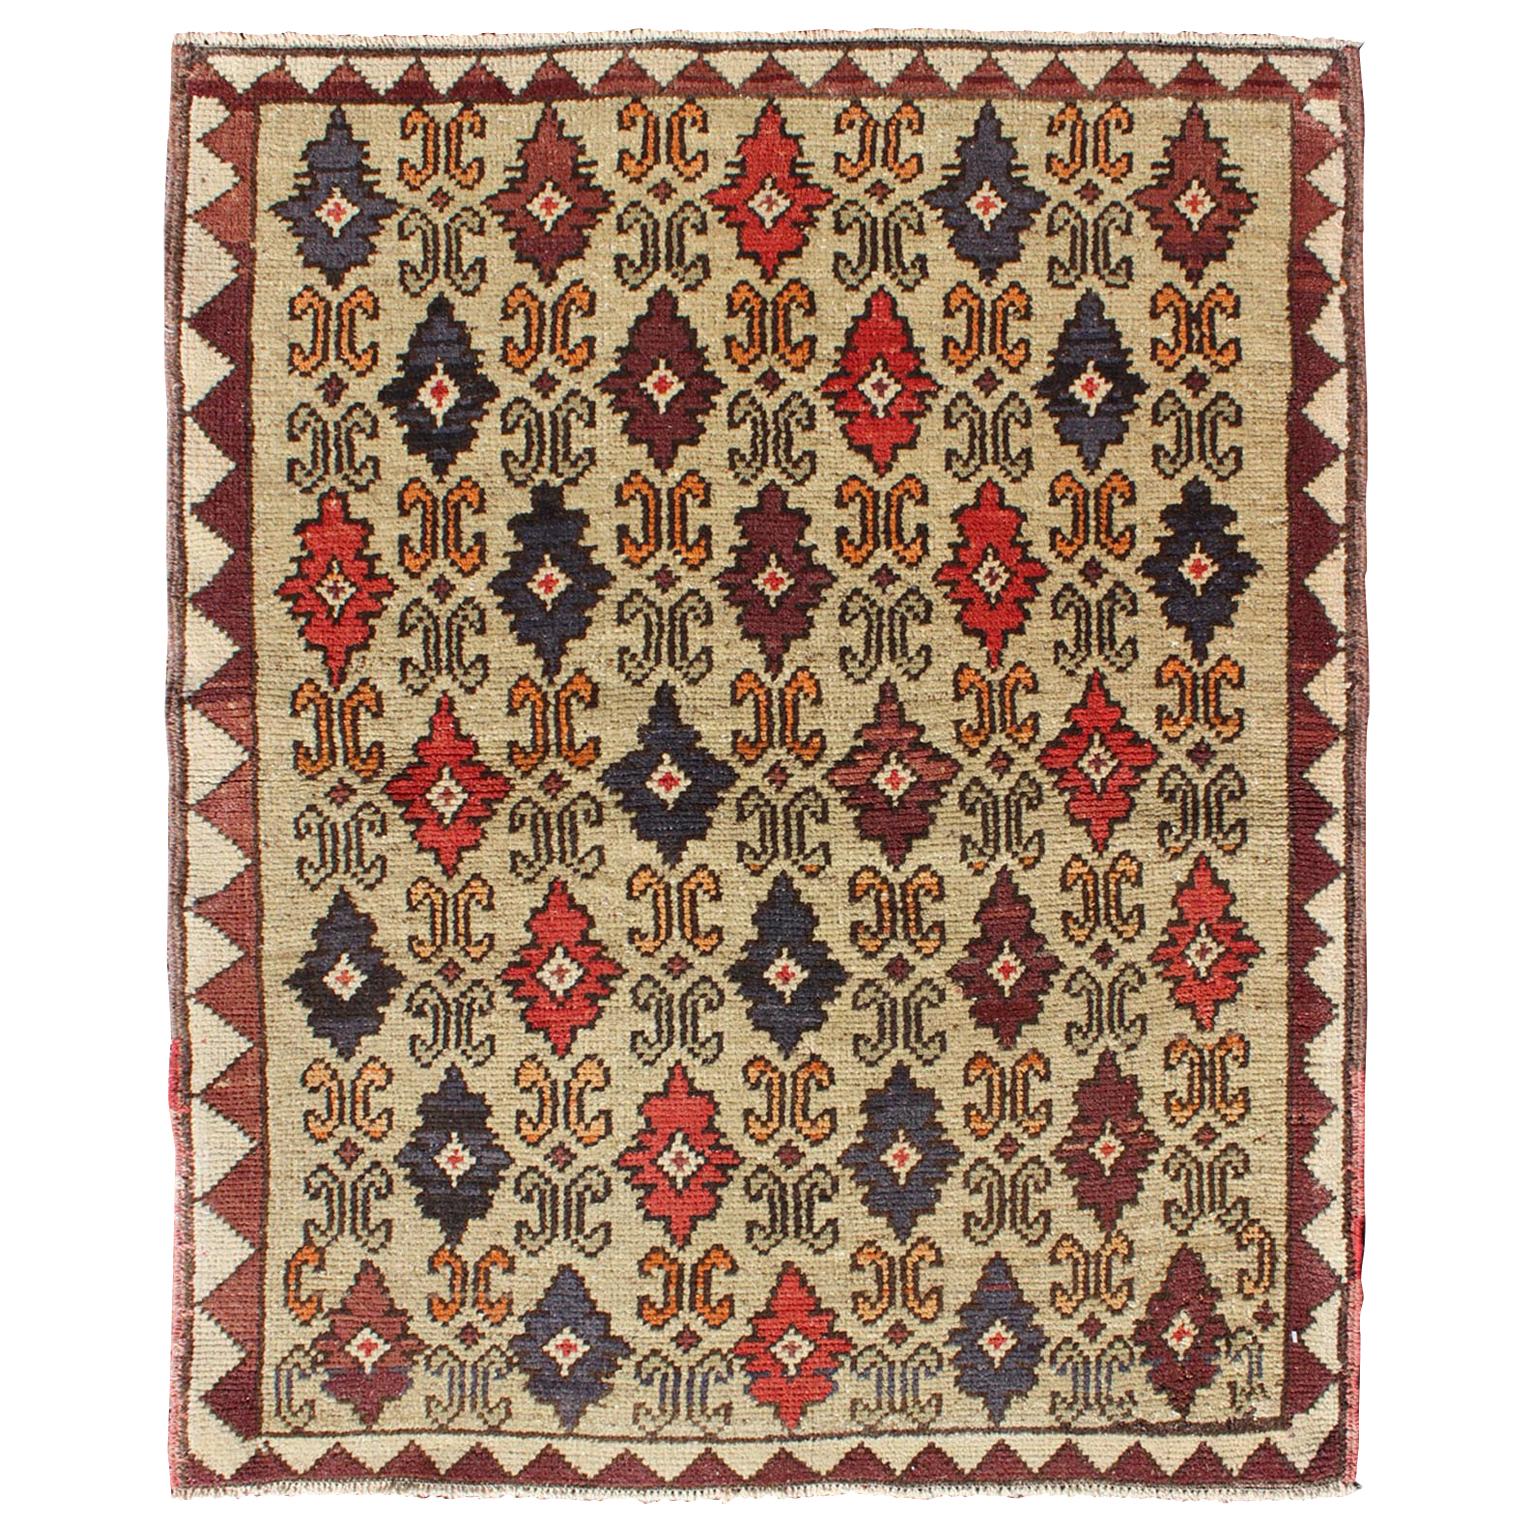 Colorful Midcentury Turkish Tulu Rug with Repeating Design Set on Wheat Field